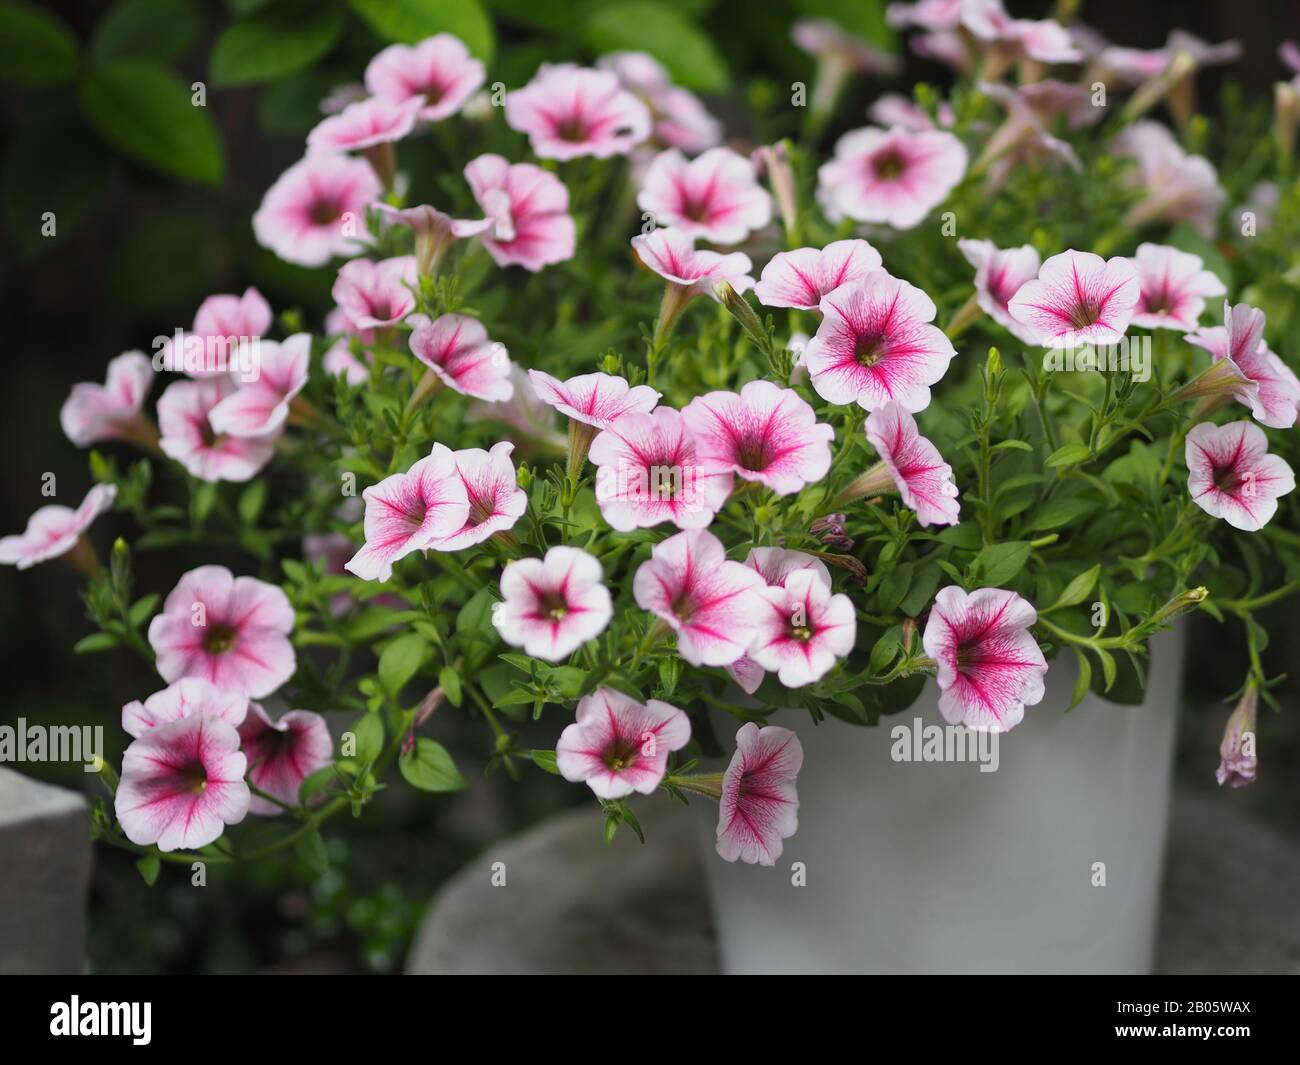 Petunia Easy wave viloet pink color  flower beautiful on blurred of nature background Stock Photo